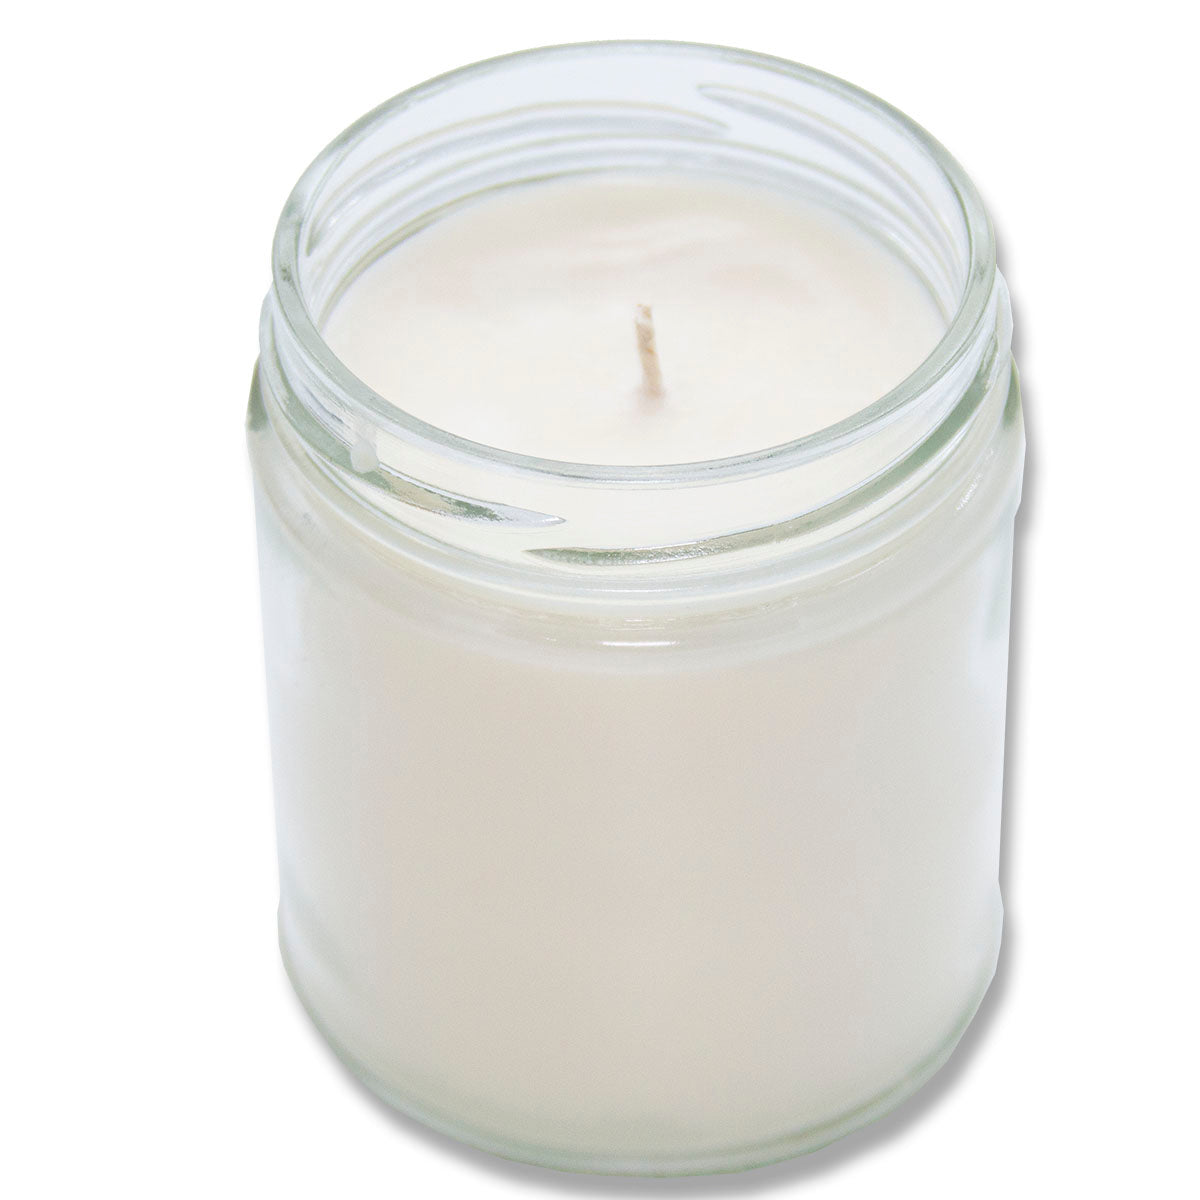 Leather & Lace, Lone Star Candles & More’s Original Aroma of Genuine Leather and Creamy Vanilla, 9oz Clear Round Jar, USA Made in Texas